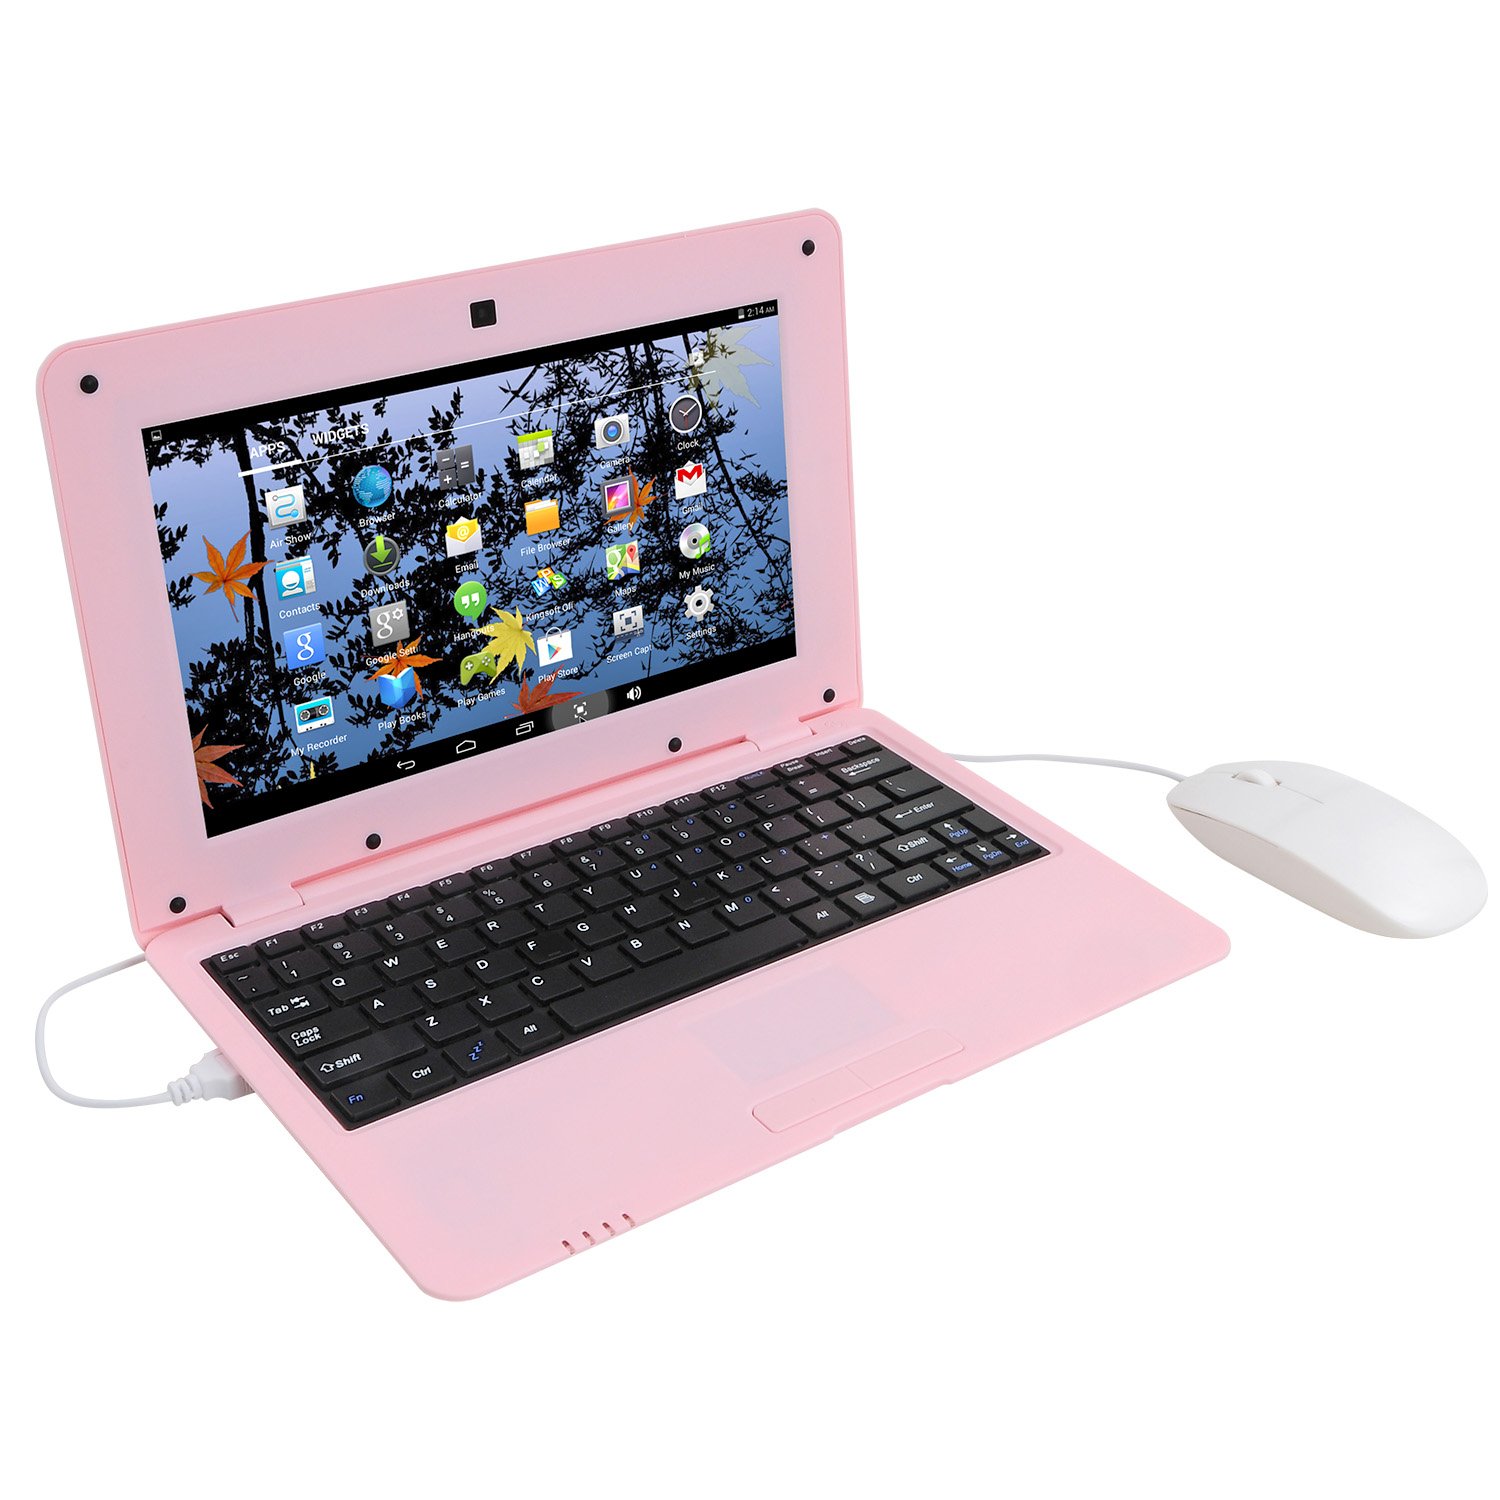 Goldengulf 10.1 Inch Portable 8GB Computer Laptop PC Quad Core Android 6.0 Mini Netbook Slim and Lightweight Notebook Webcam Netflix YouTube Google Player Flash (Pink)